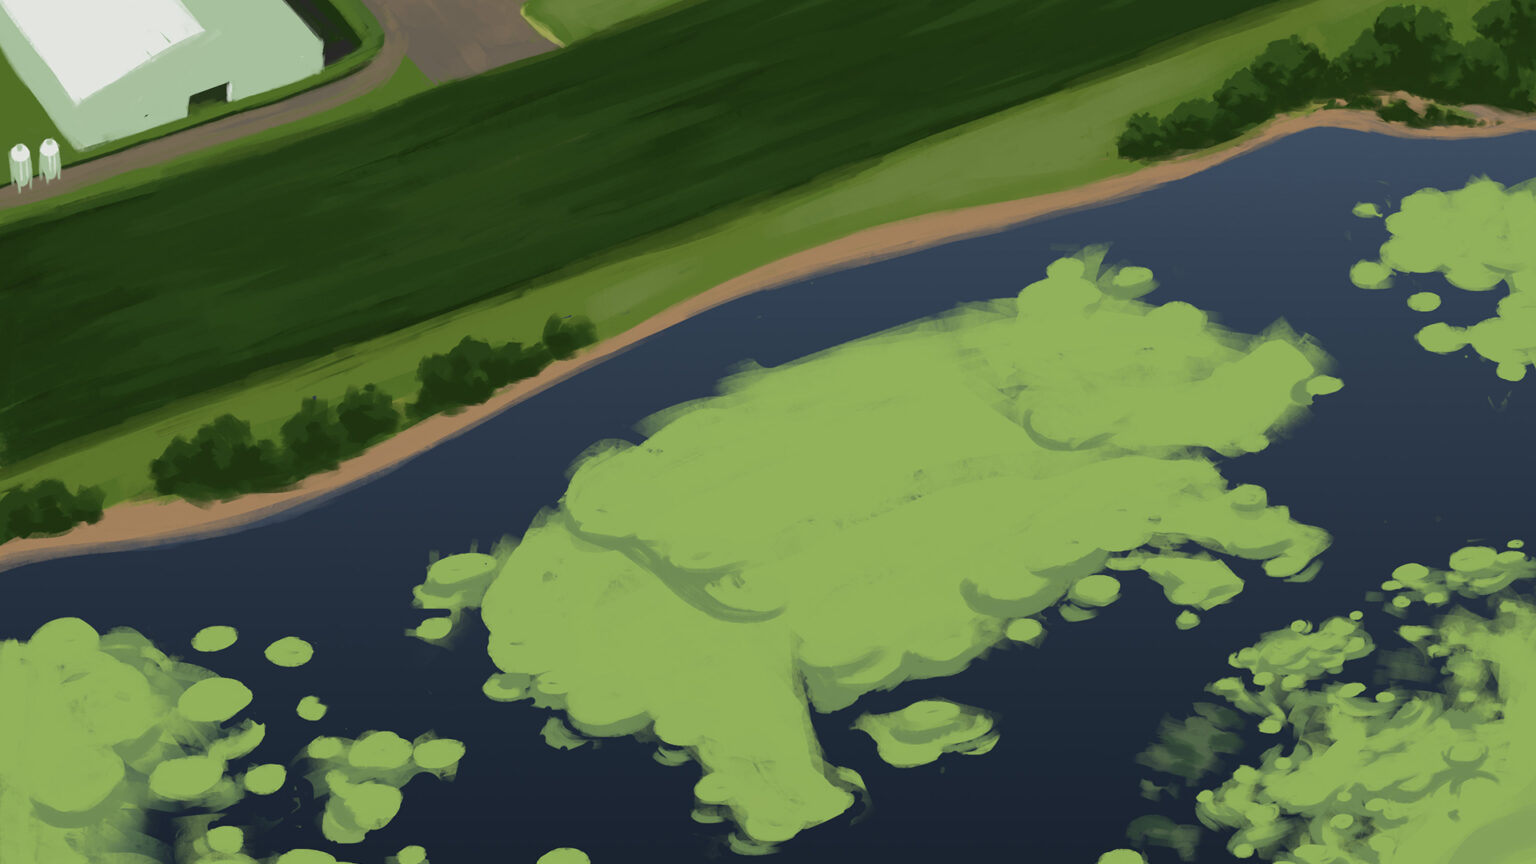 An illustration shows an aerial view of a farm and adjacent body of water, with algal growth on its surface in the shape of a pig.